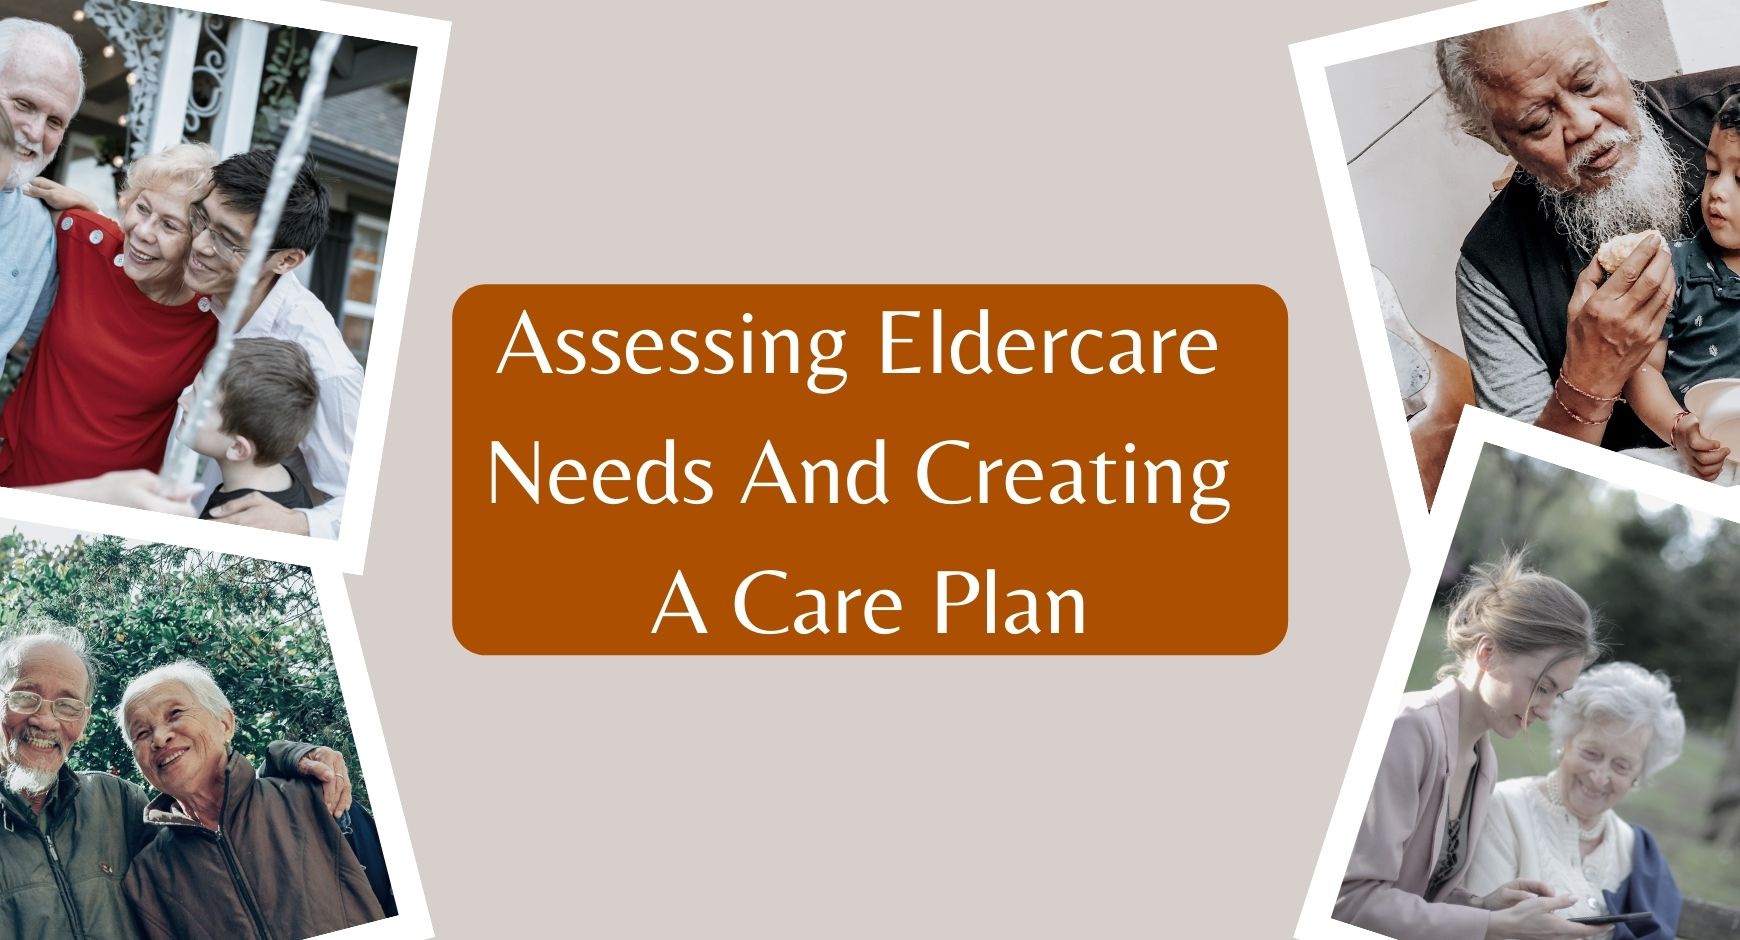 Pictures of families with elderly members srounding the words "Assessing Eldercare Needs And Creating A Care Plan"